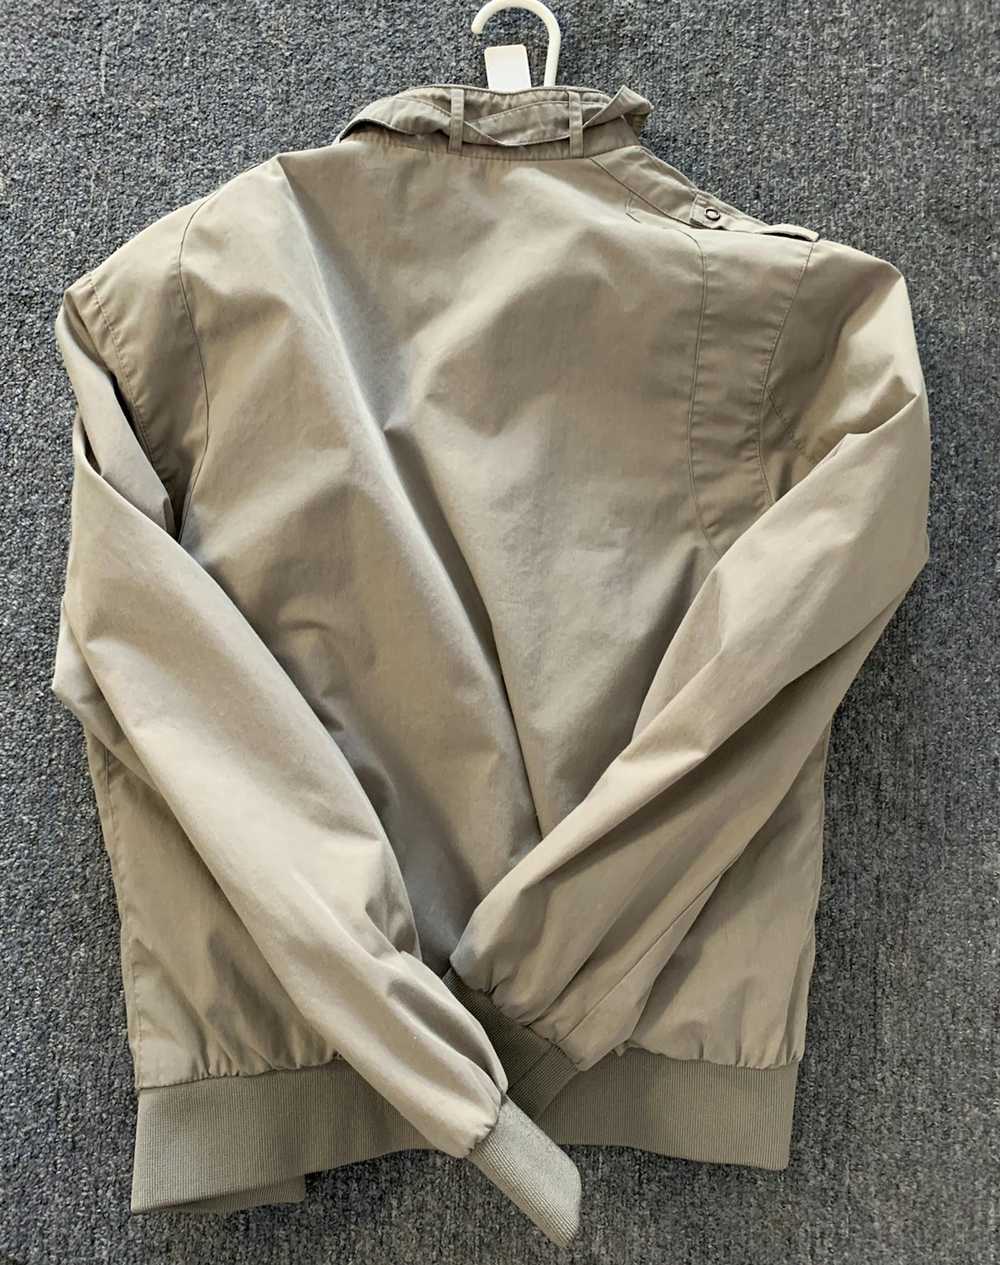 Members Only Members Only Jacket - image 4